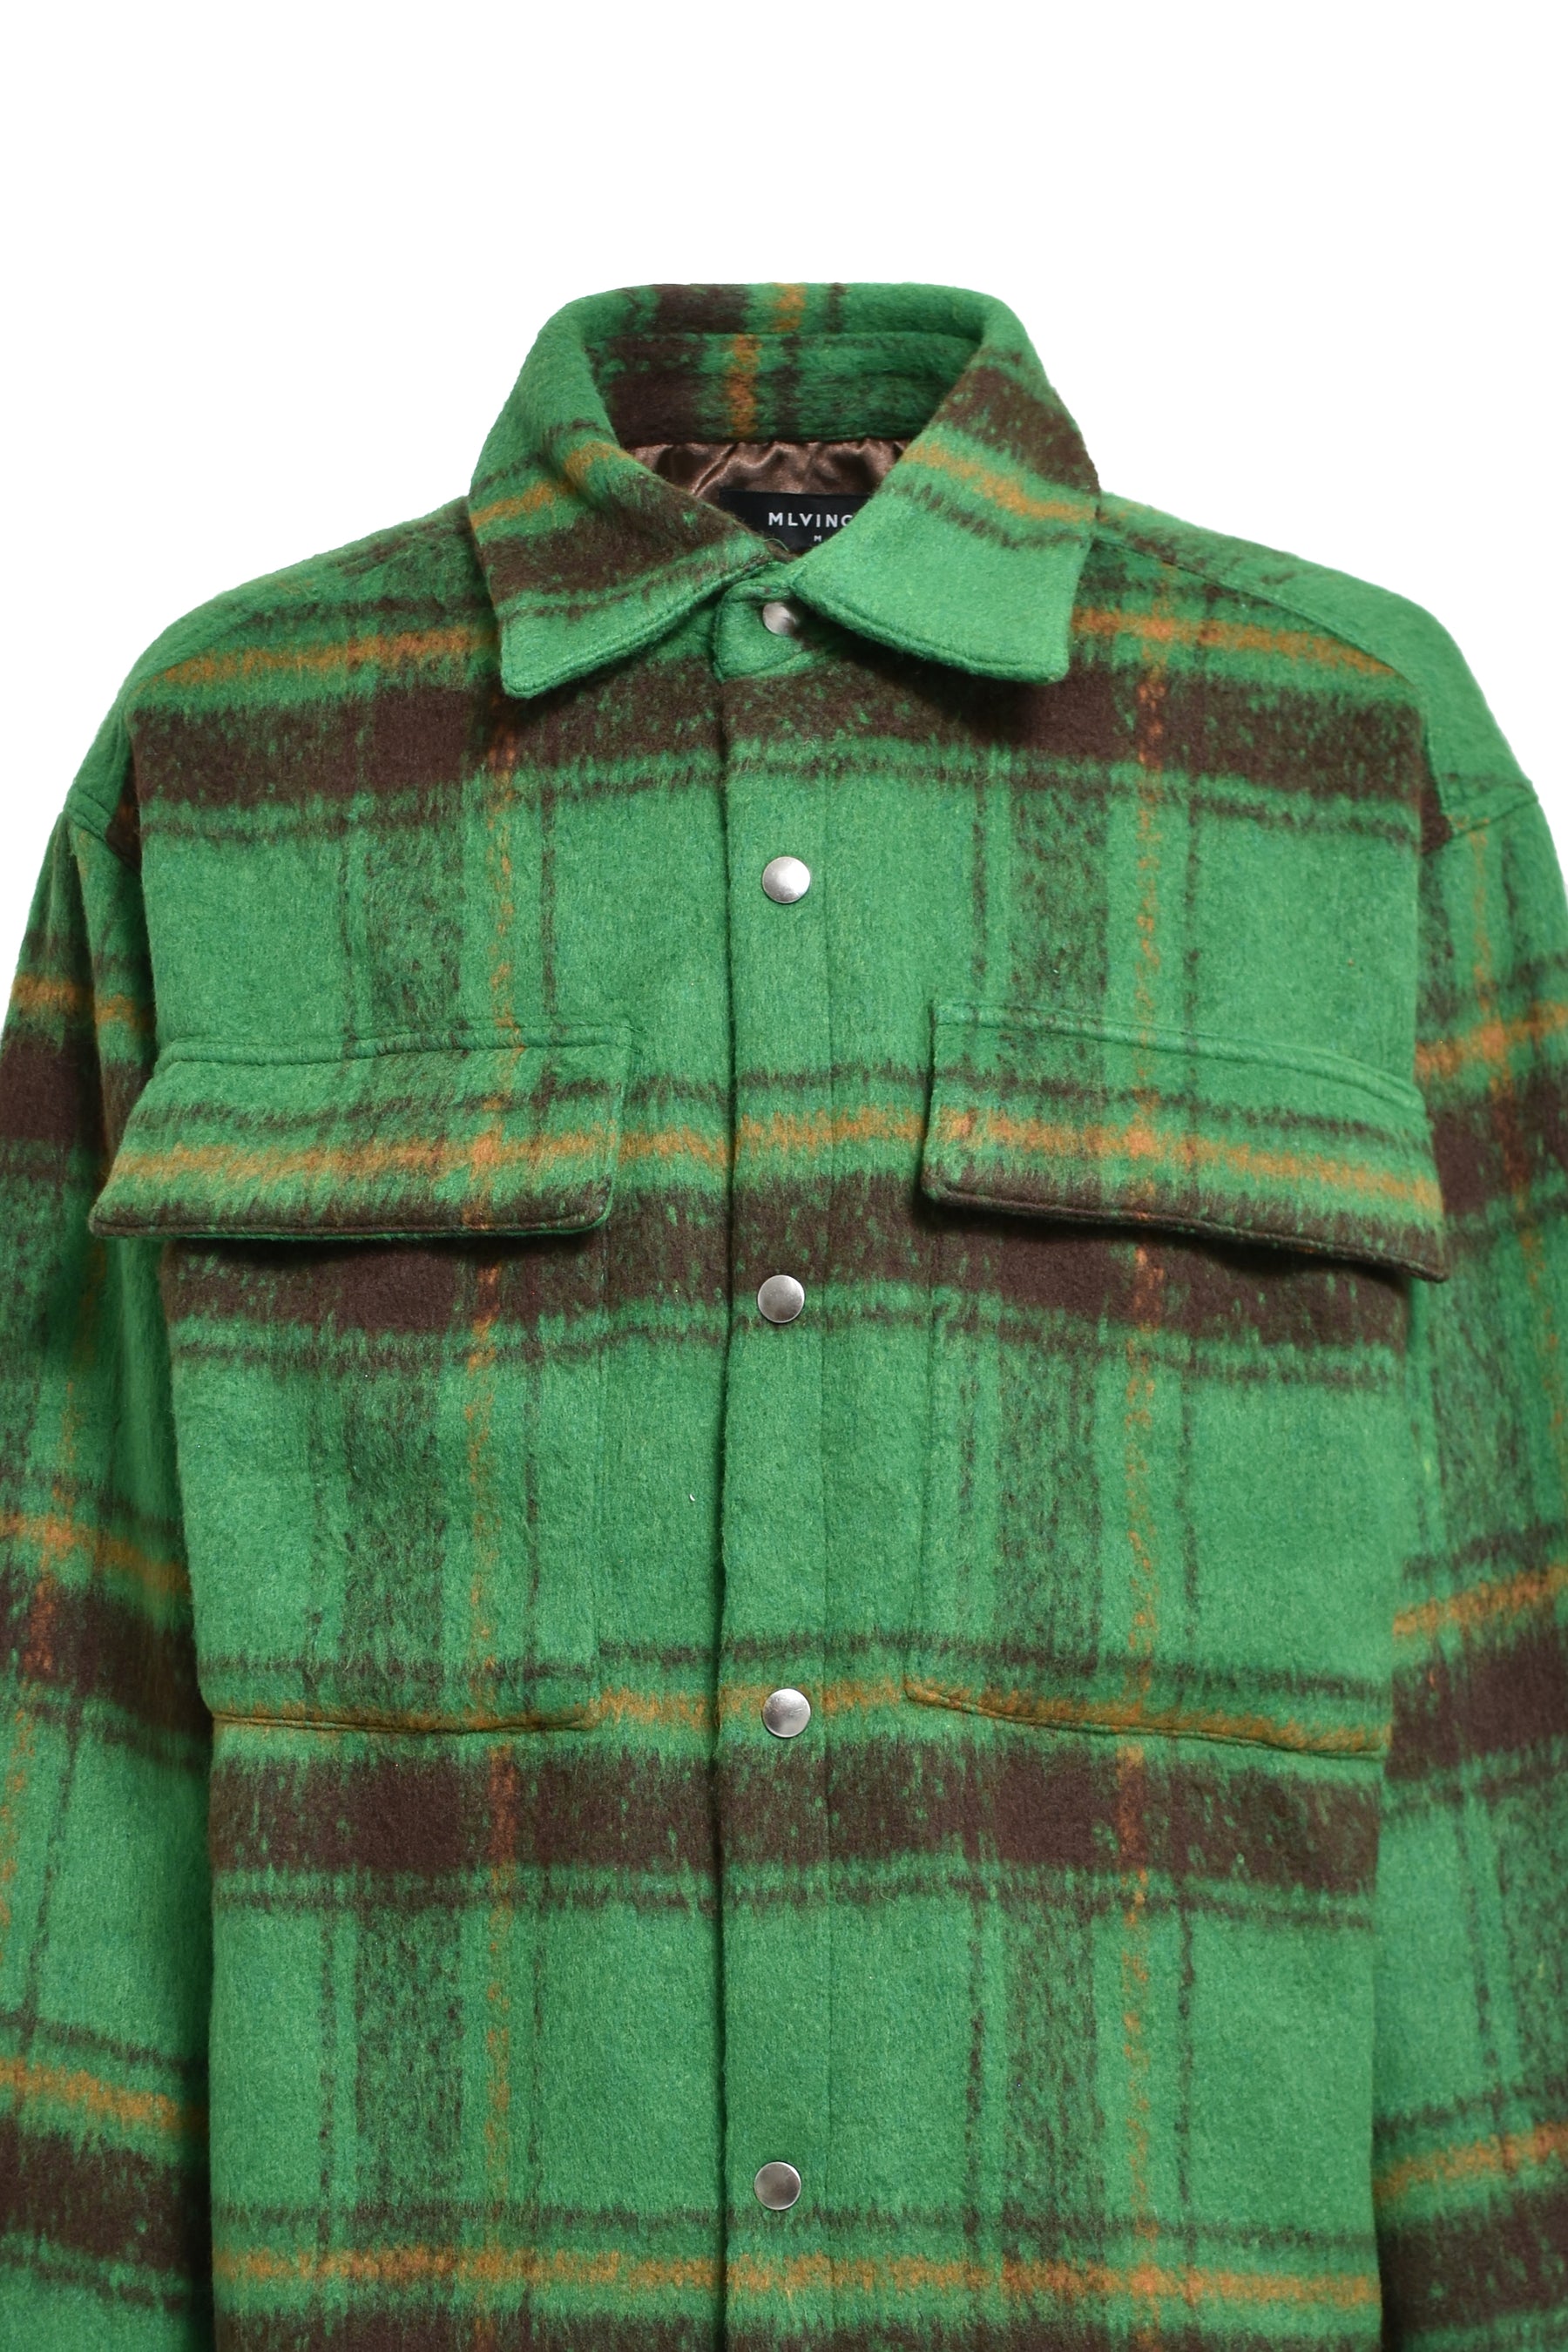 MLVINCE メルヴィンス FW23 OVERSIZED CHECK JACKET / GRN -NUBIAN